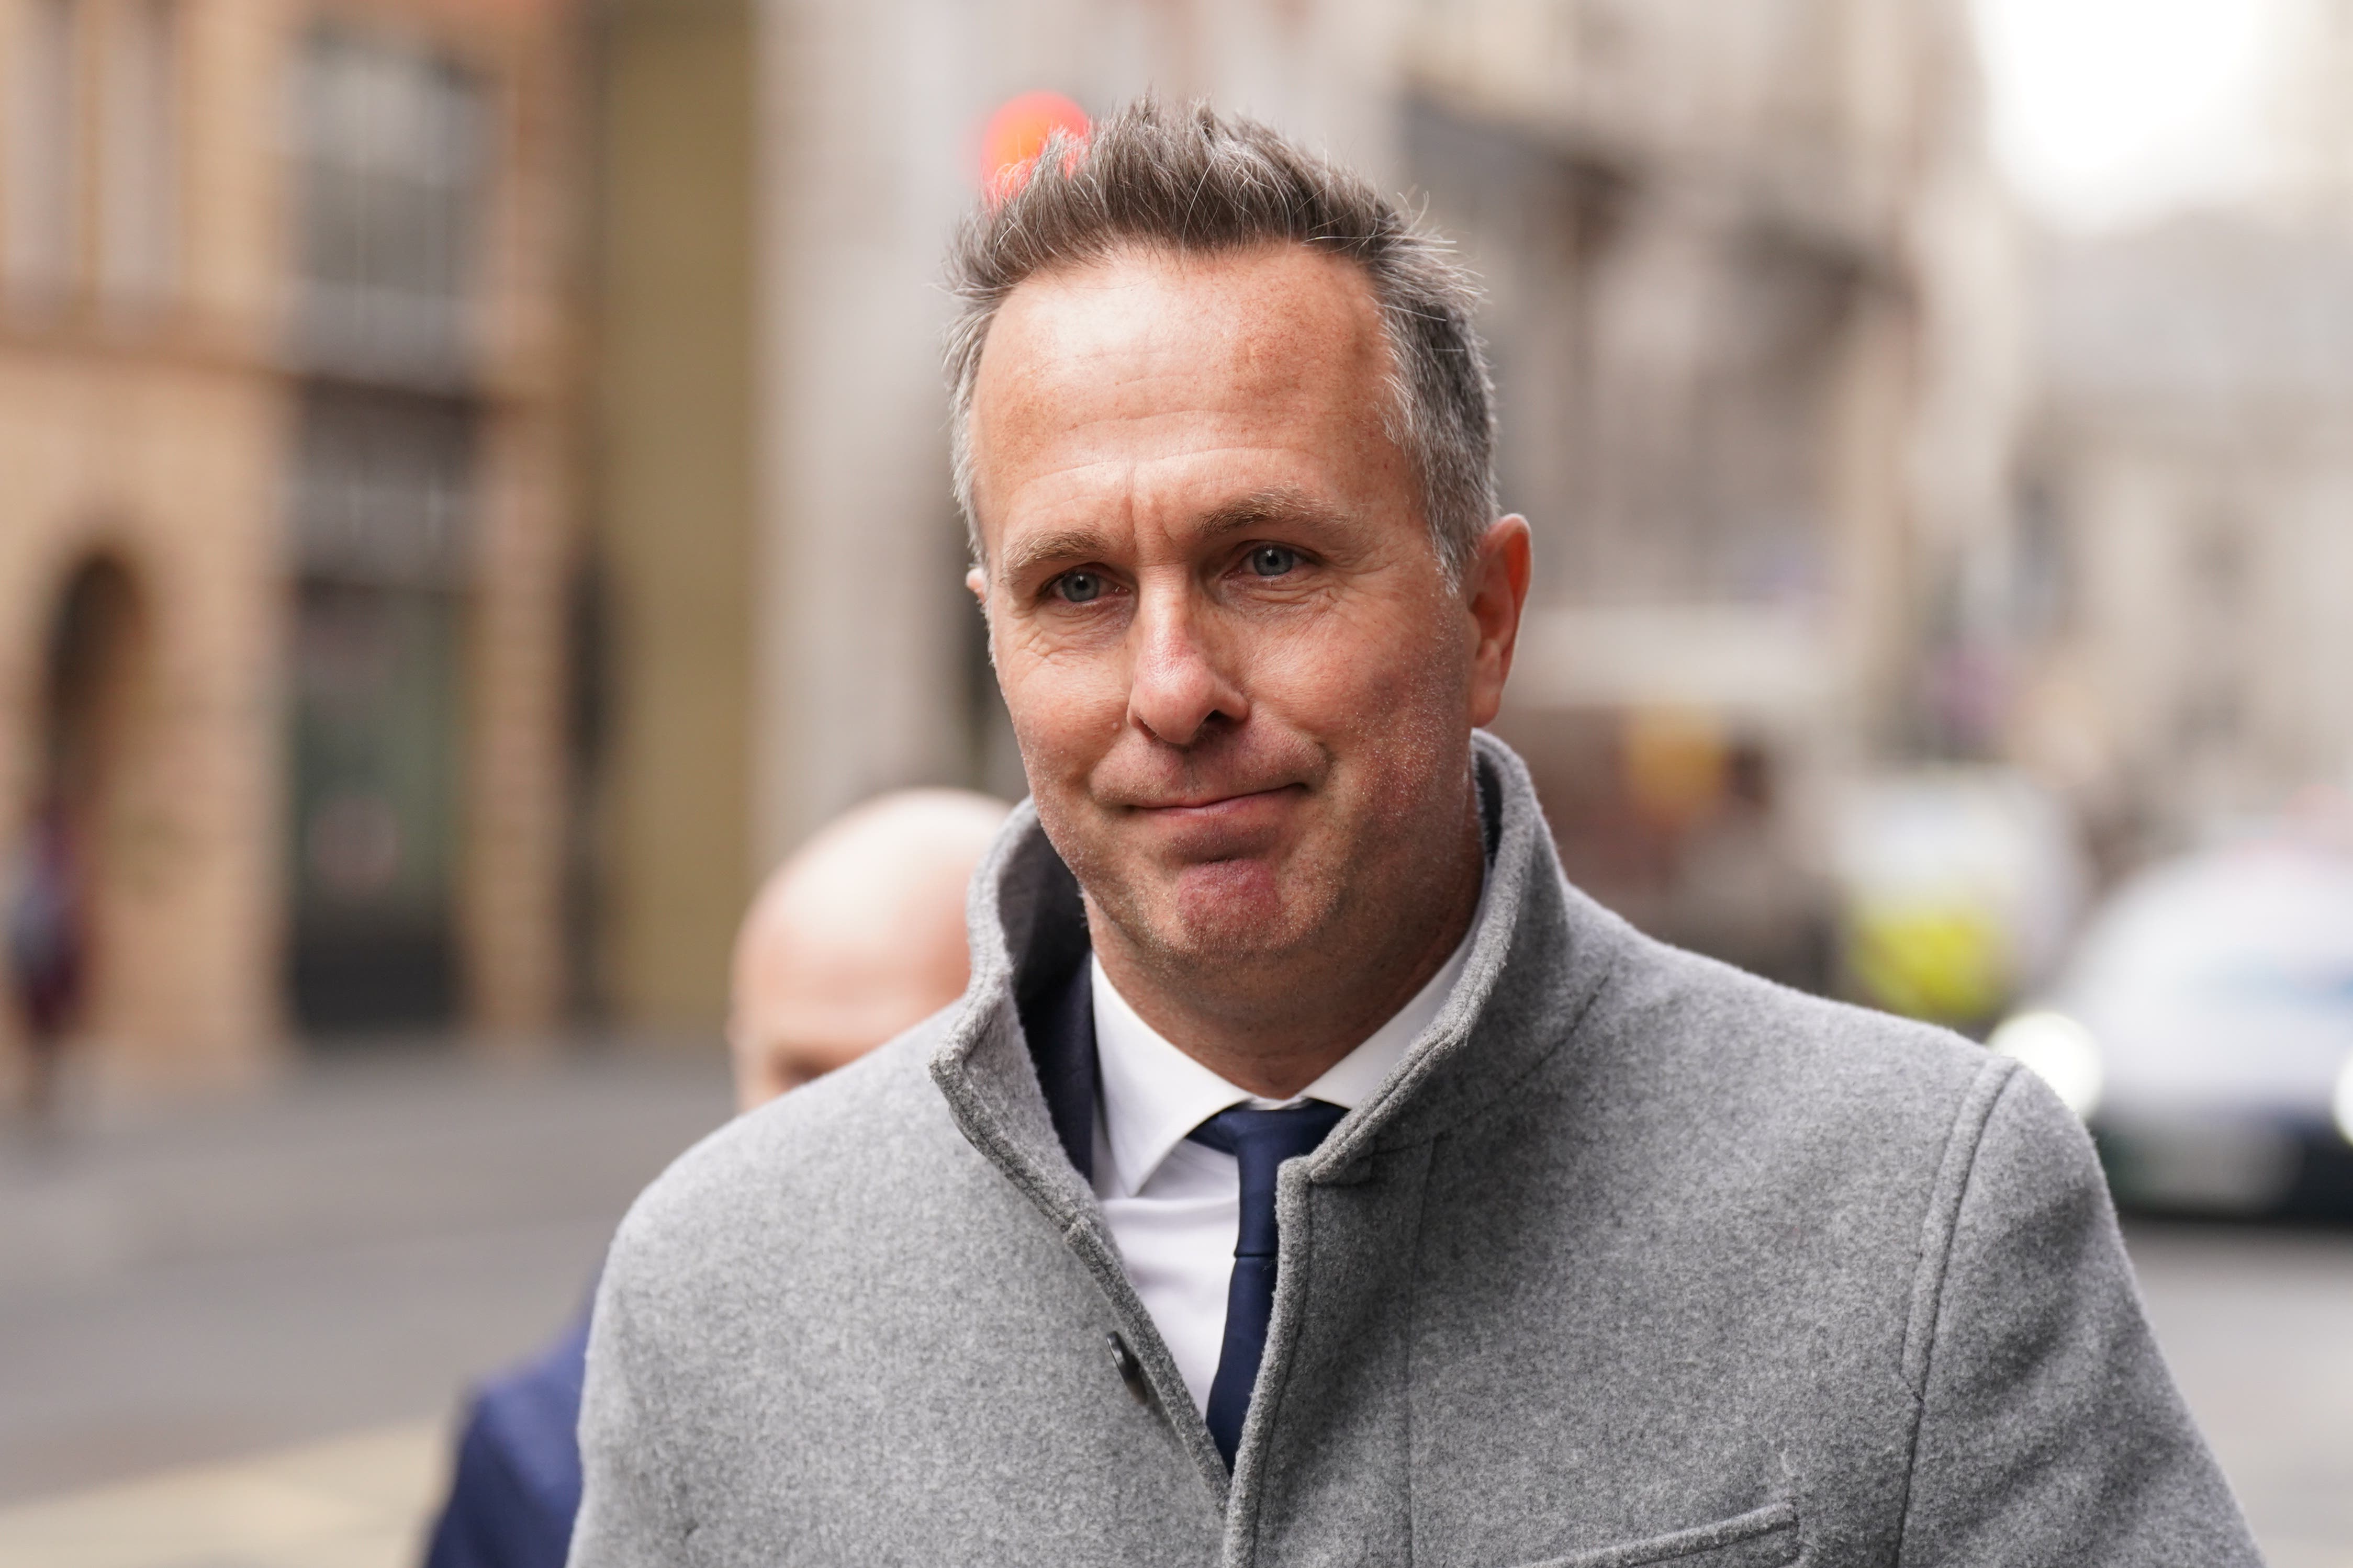 Michael Vaughan revealed his wife’s mental health suffered during his legal proceedings (James Manning/PA)